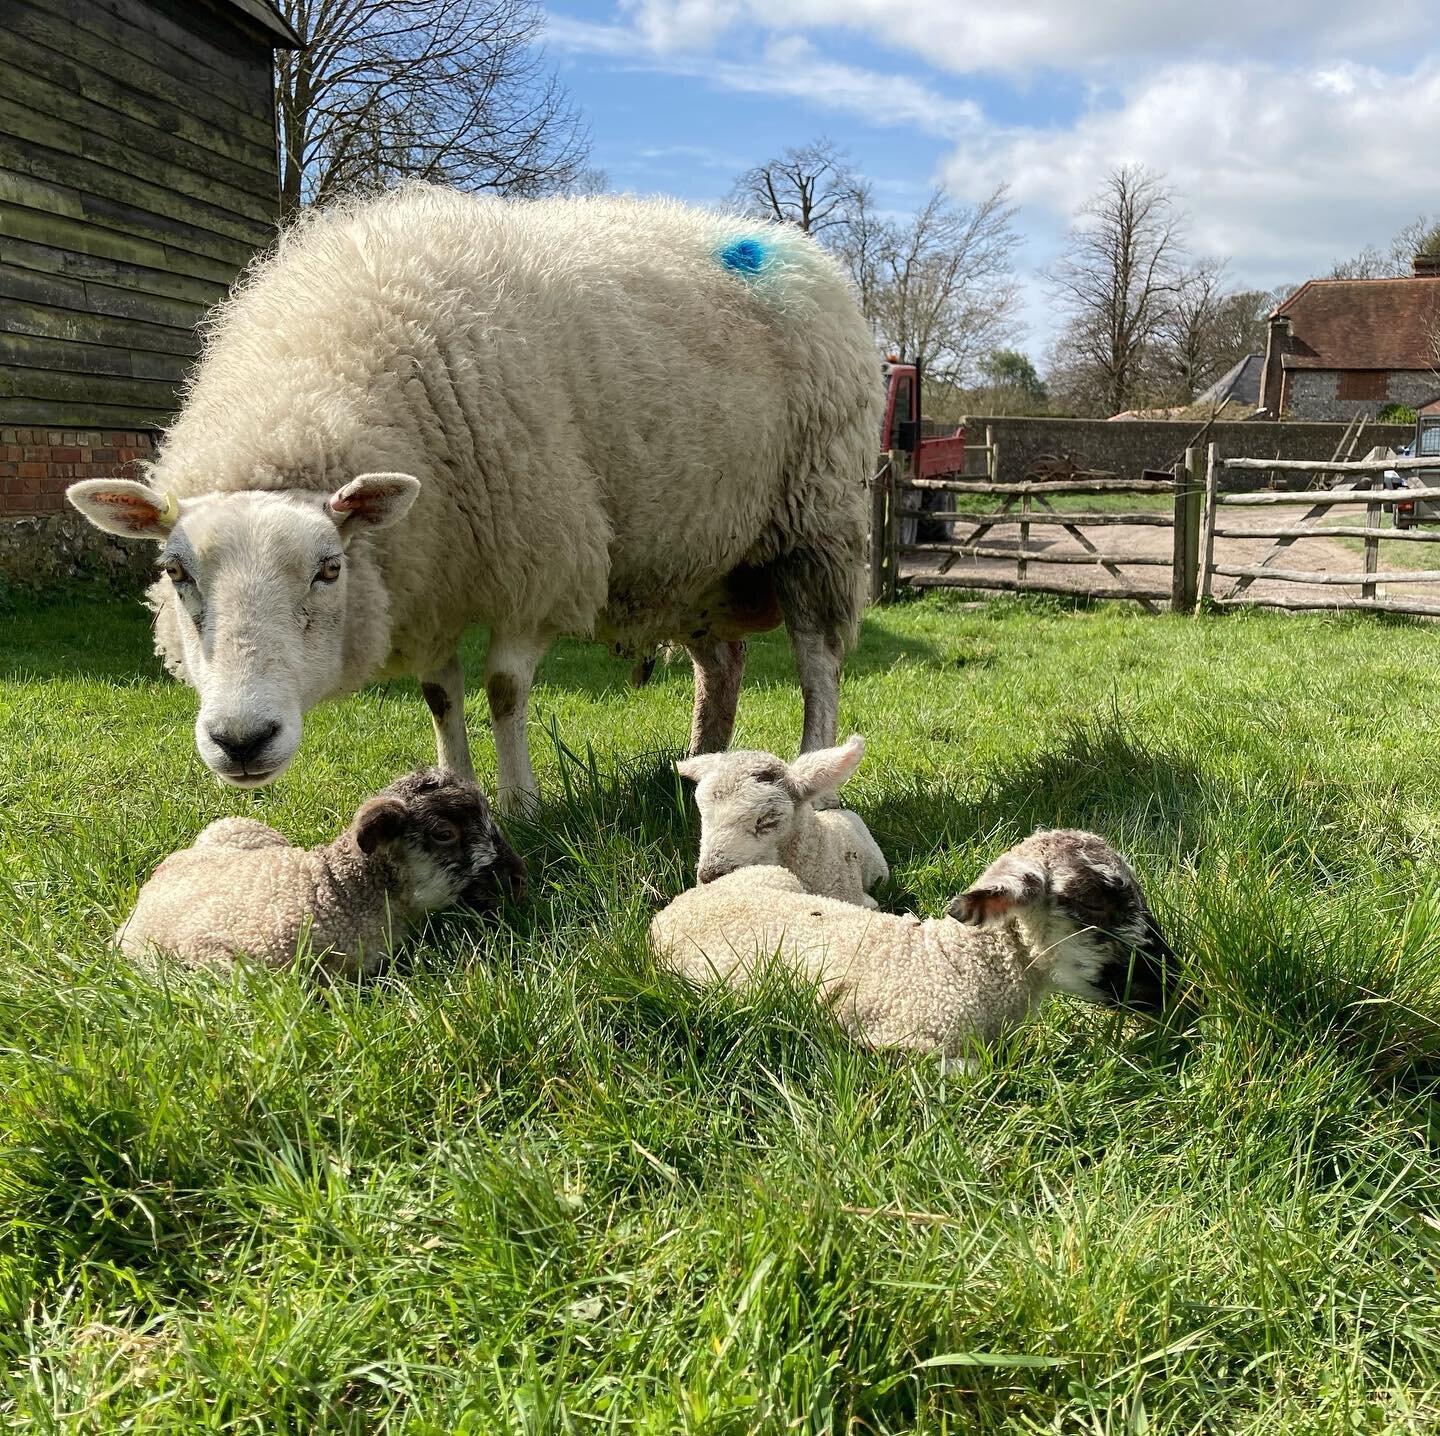 Lovely day to be born 💚🐑 come and visit this weekend. We&rsquo;re open Saturday and Sunday 10am - 4pm. 

See newborn lambs, meet our amazing vet students past and present, taste delicious local food. Tractor and trailer rides weather permitting and